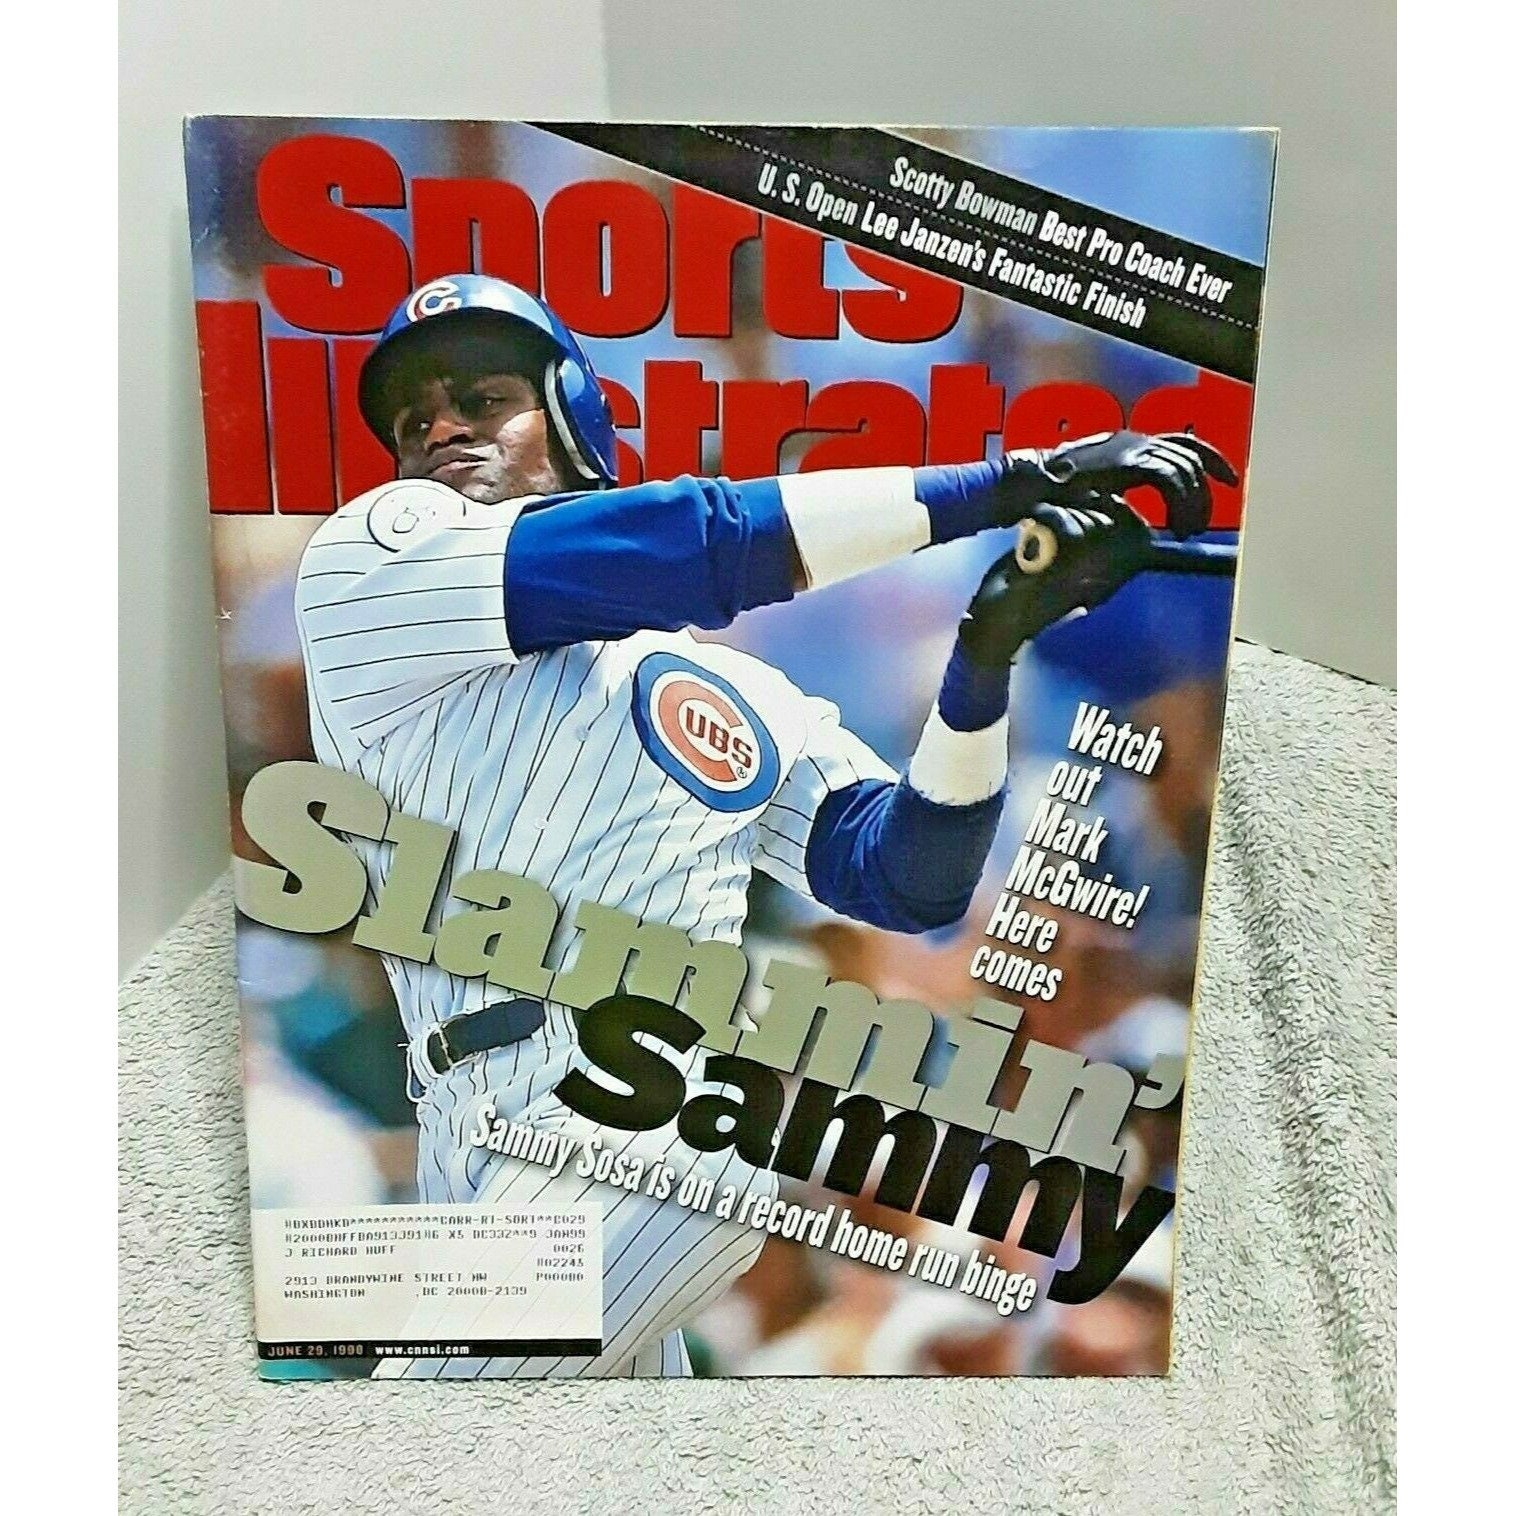 Mark Mcgwire And Sammy Sosa The Great Home Run Race Sports Illustrated  Cover by Sports Illustrated